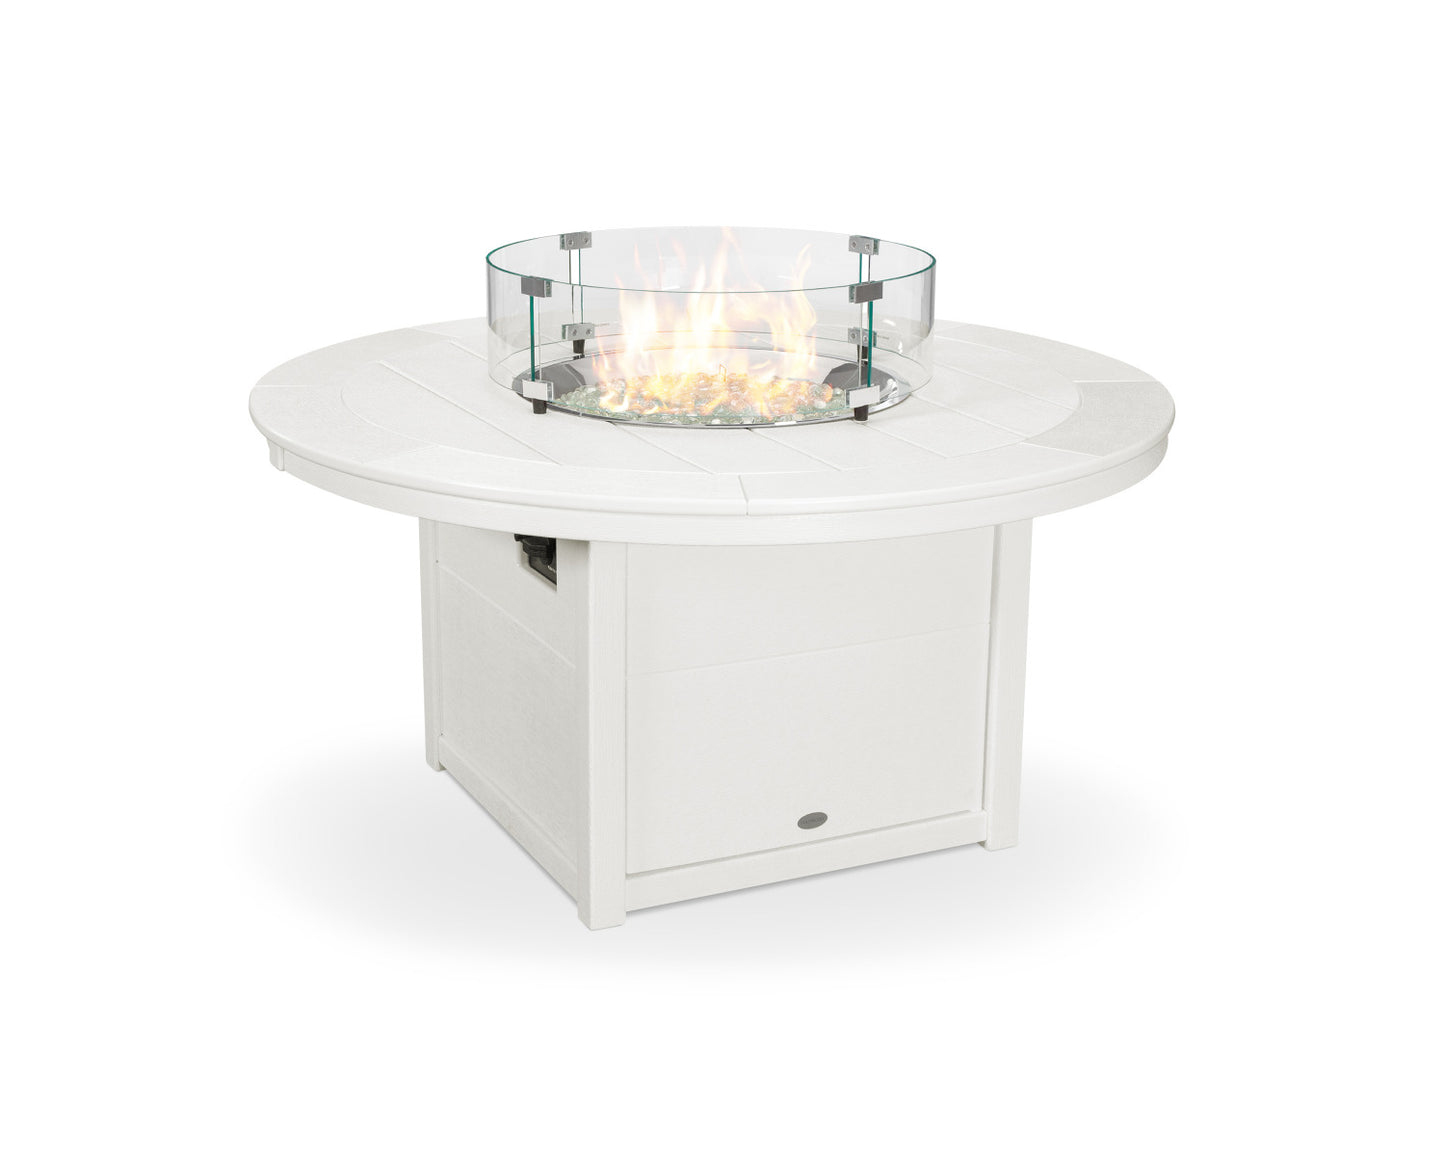 POLYWOOD 48 Inch Round Fire Pit Table